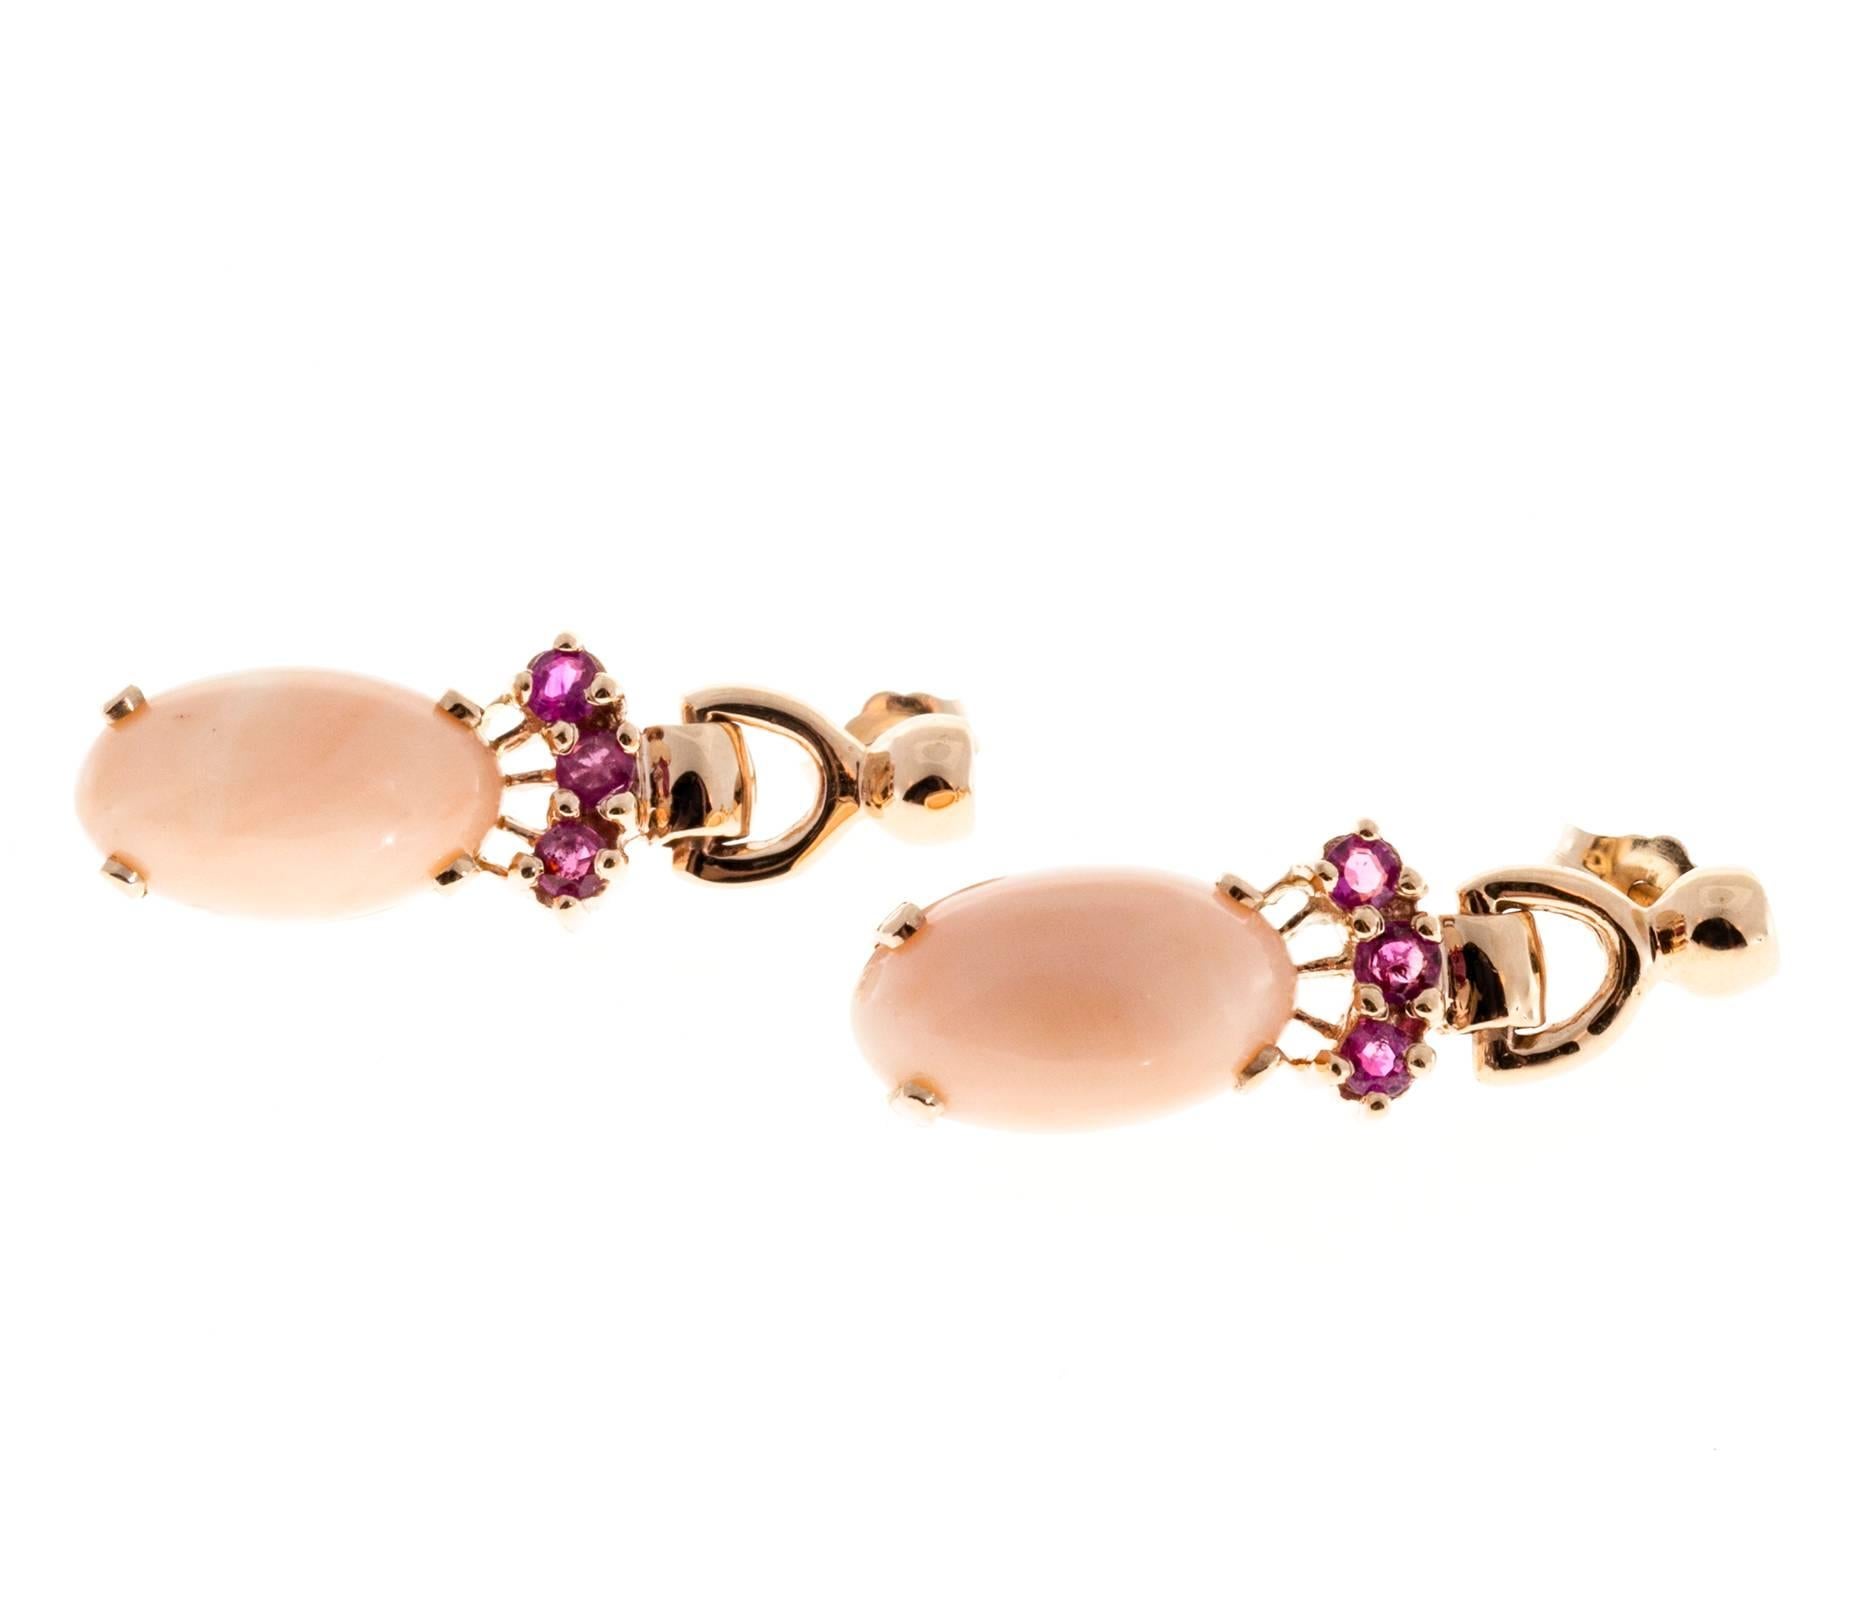 Retro Art Deco dangle earrings with bright deep pink Sapphires and all natural light to medium pink well-polished Coral. Hinged dangle design, circa 1935-1940. Beads at top are flat on top.

2 oval light pink Angel skin Coral, approx. total weight